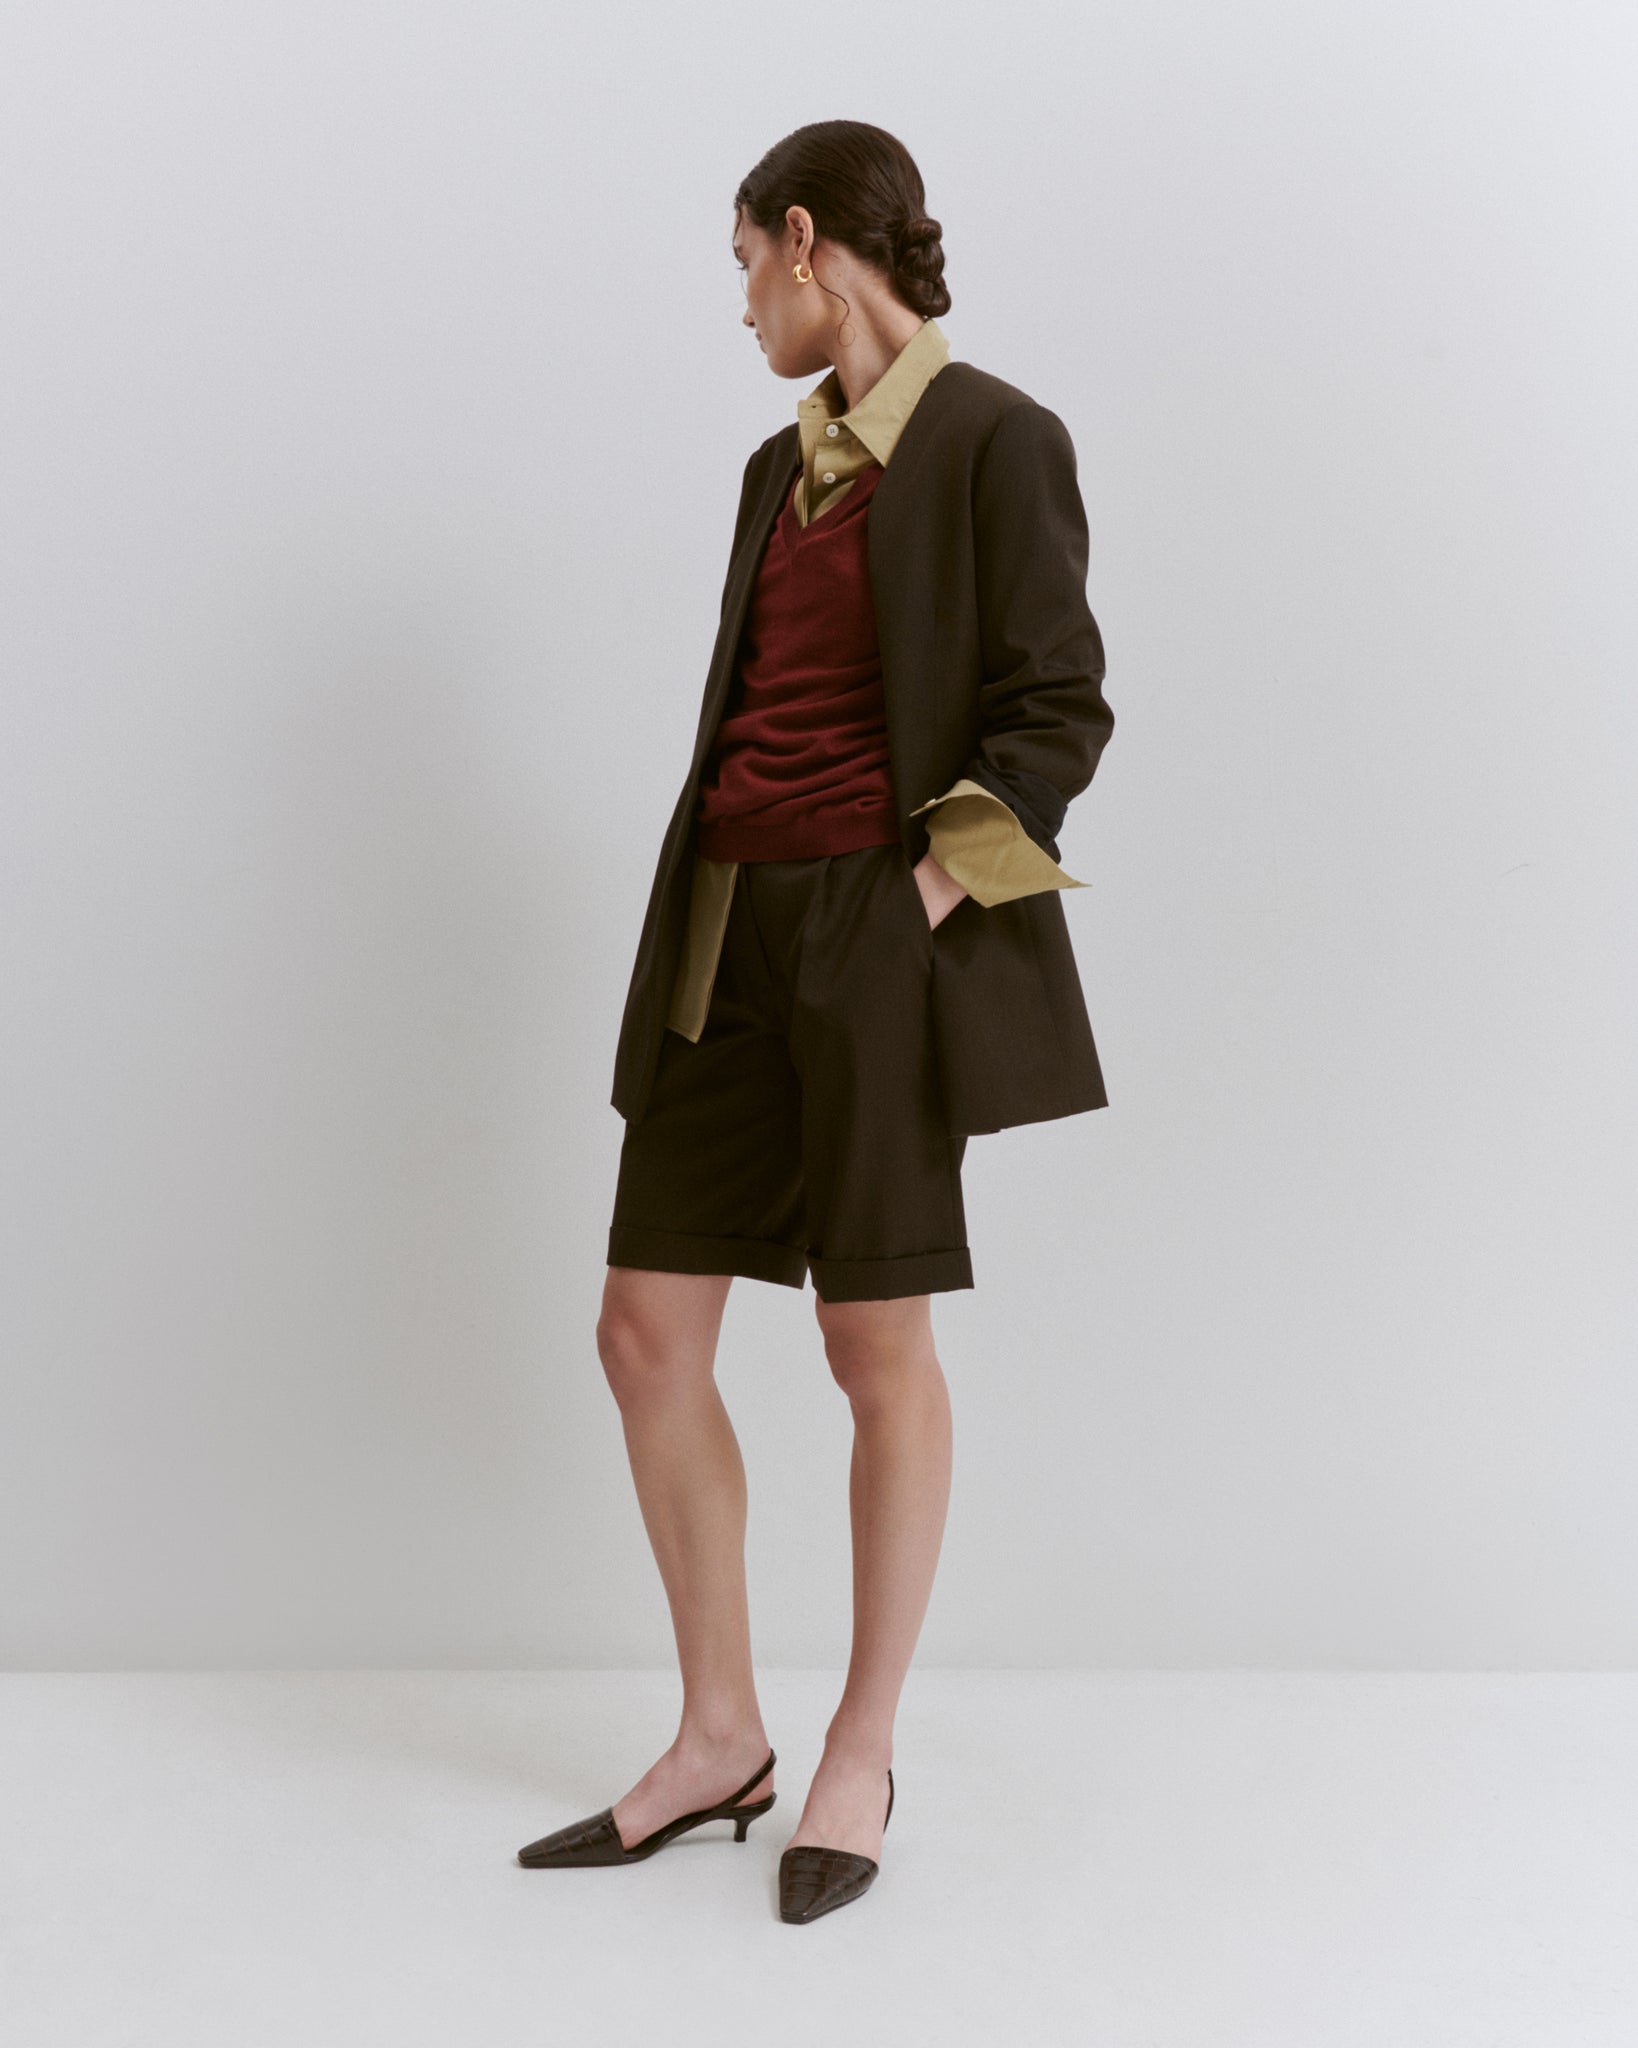 model wears Issue Twelve brown wool shorts and blazer with green shirt and red jumper